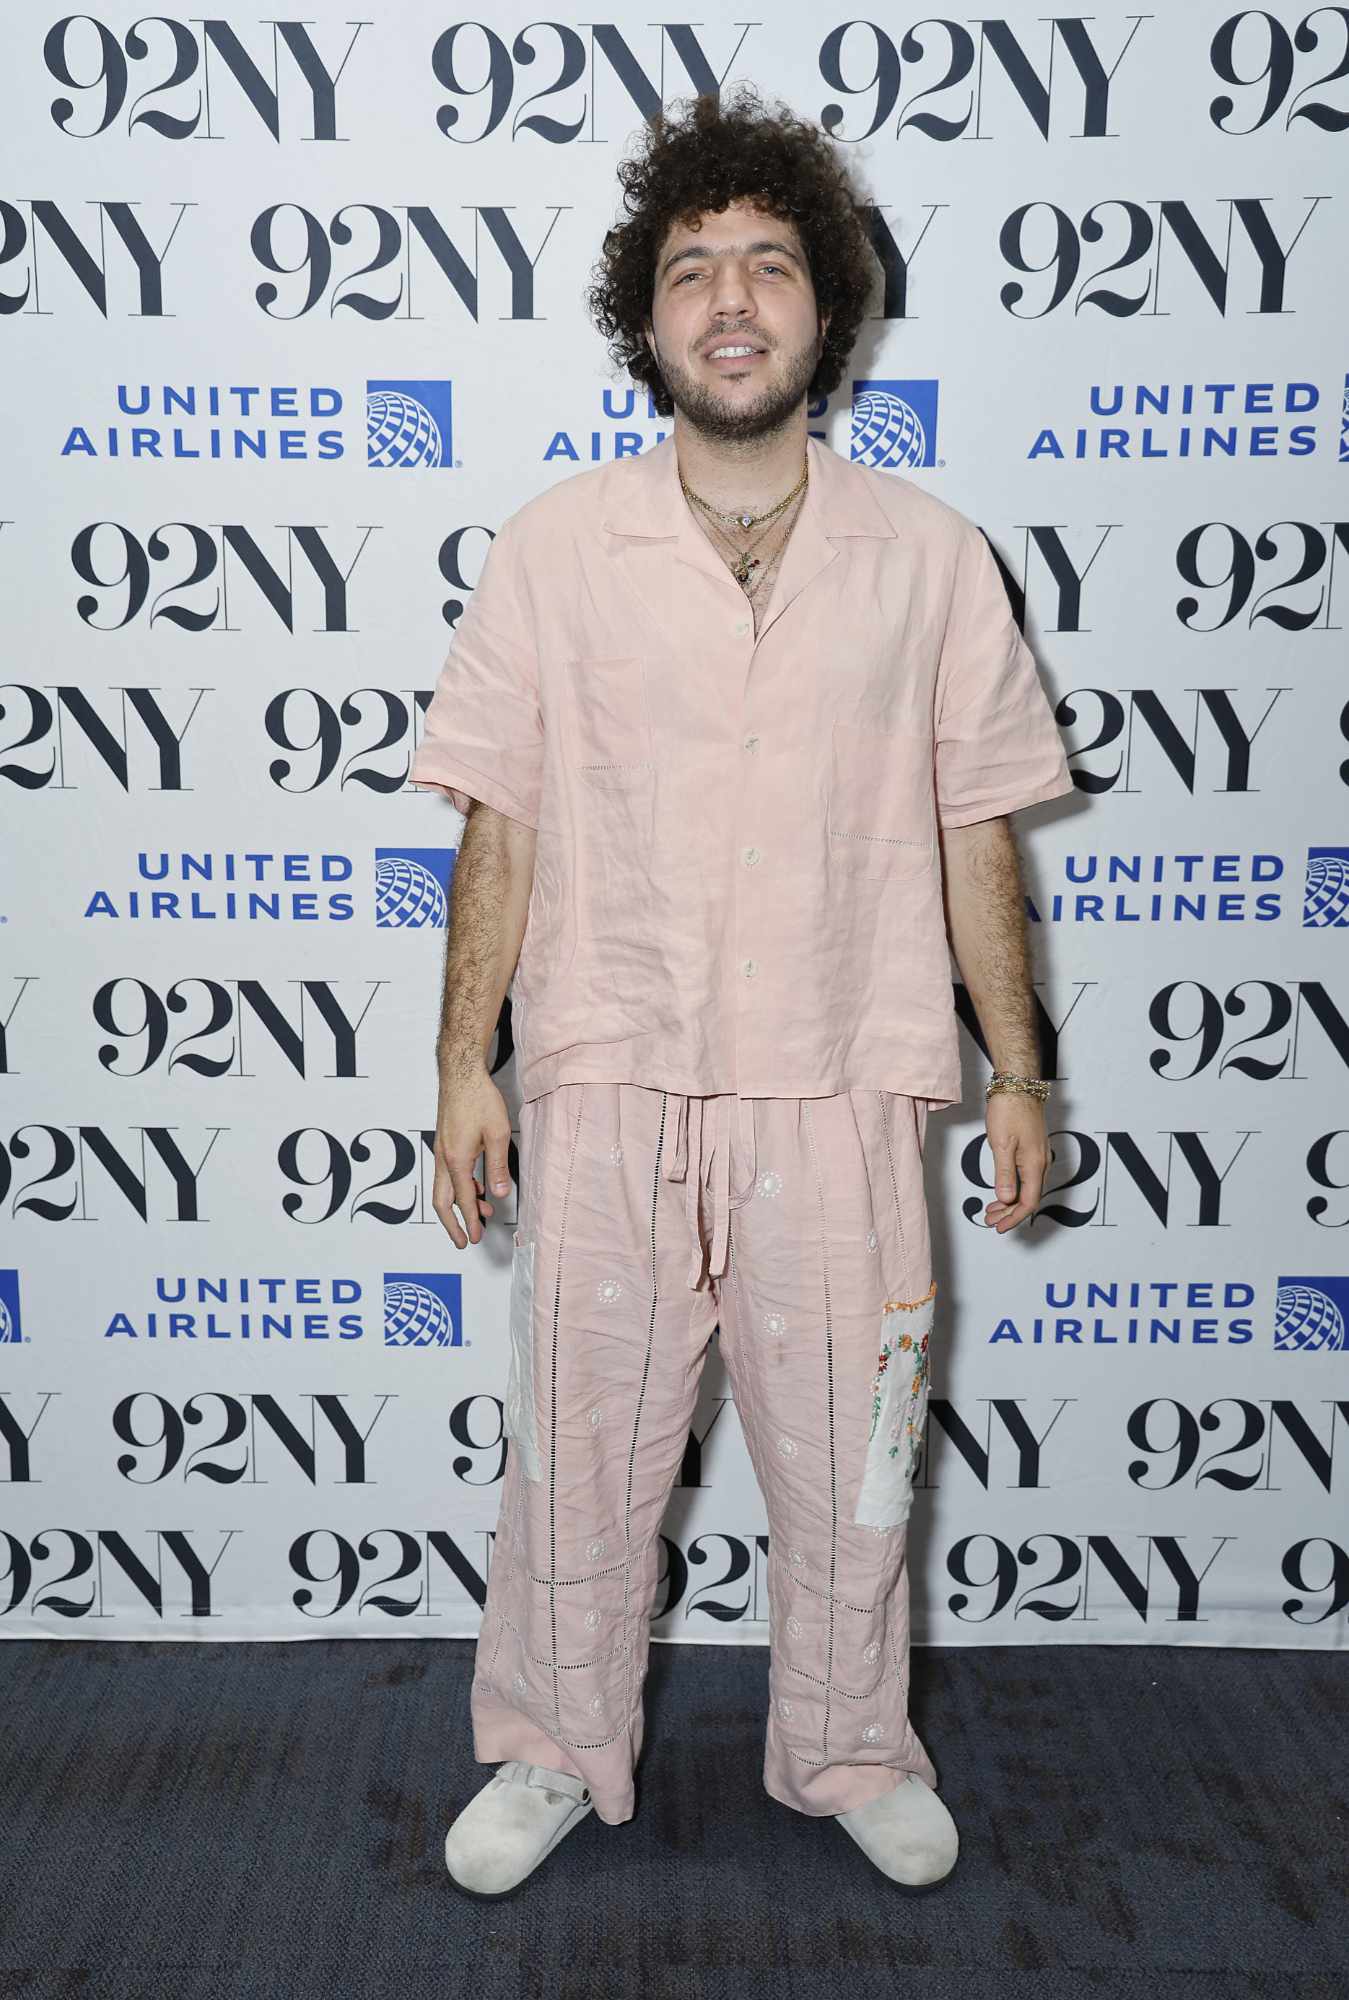 Benny Blanco wearing a beige short-sleeved shirt on the red carpet